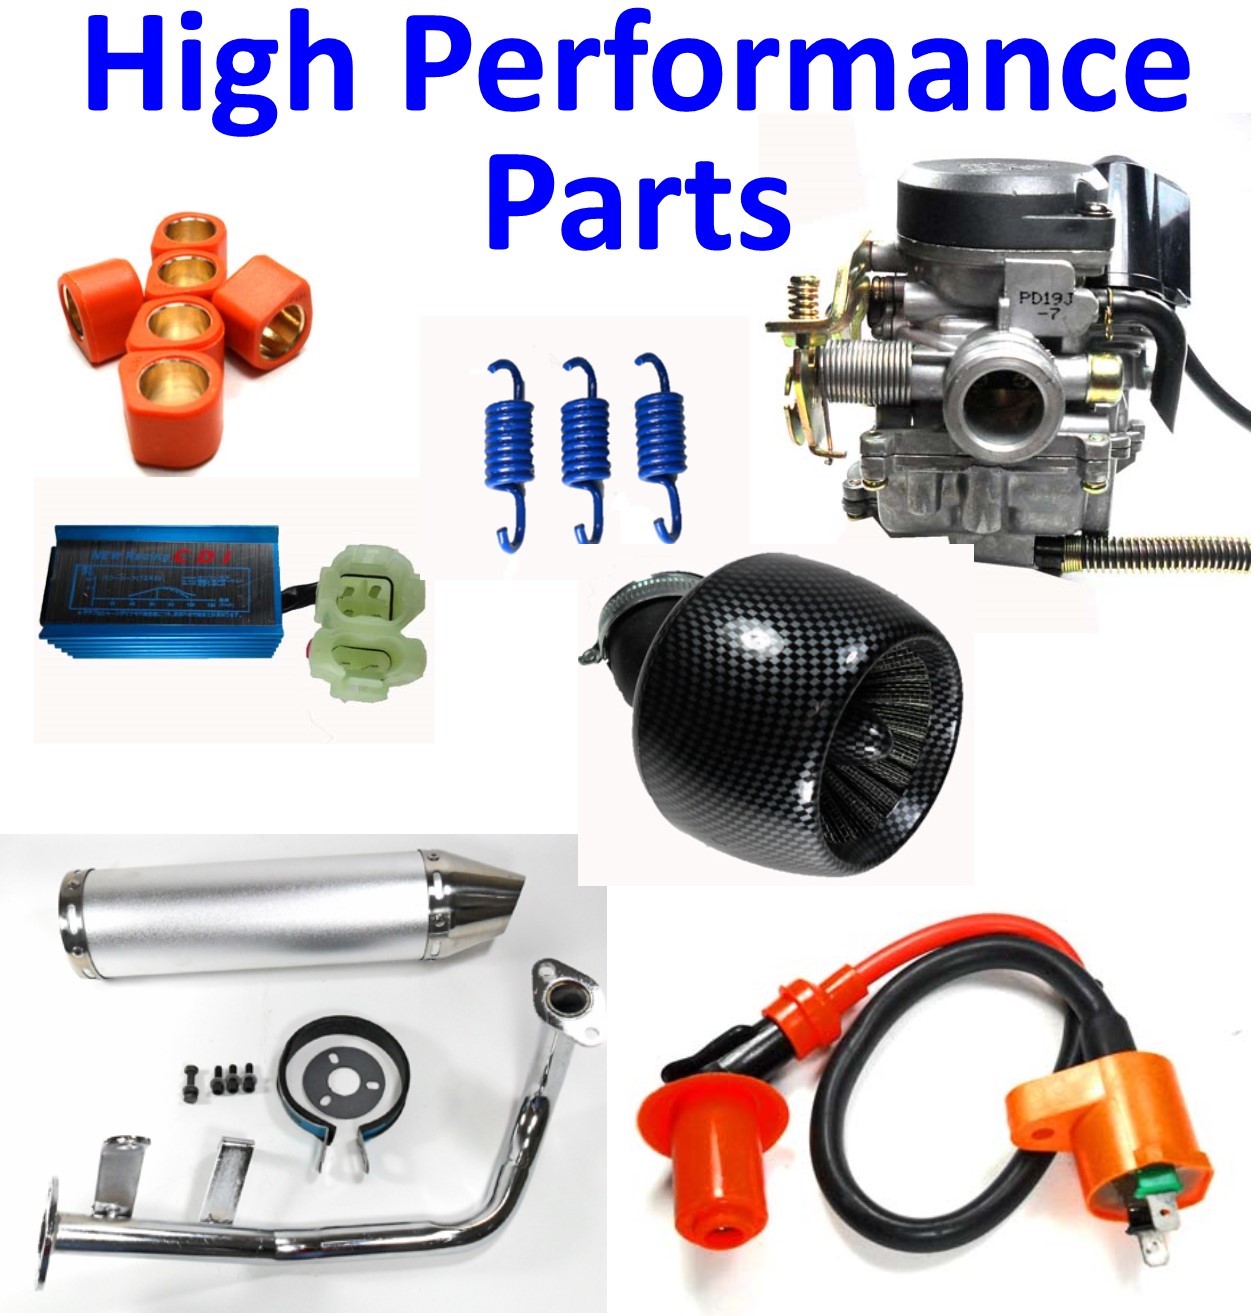 High Performance Parts 49cc-100cc Sold Separately